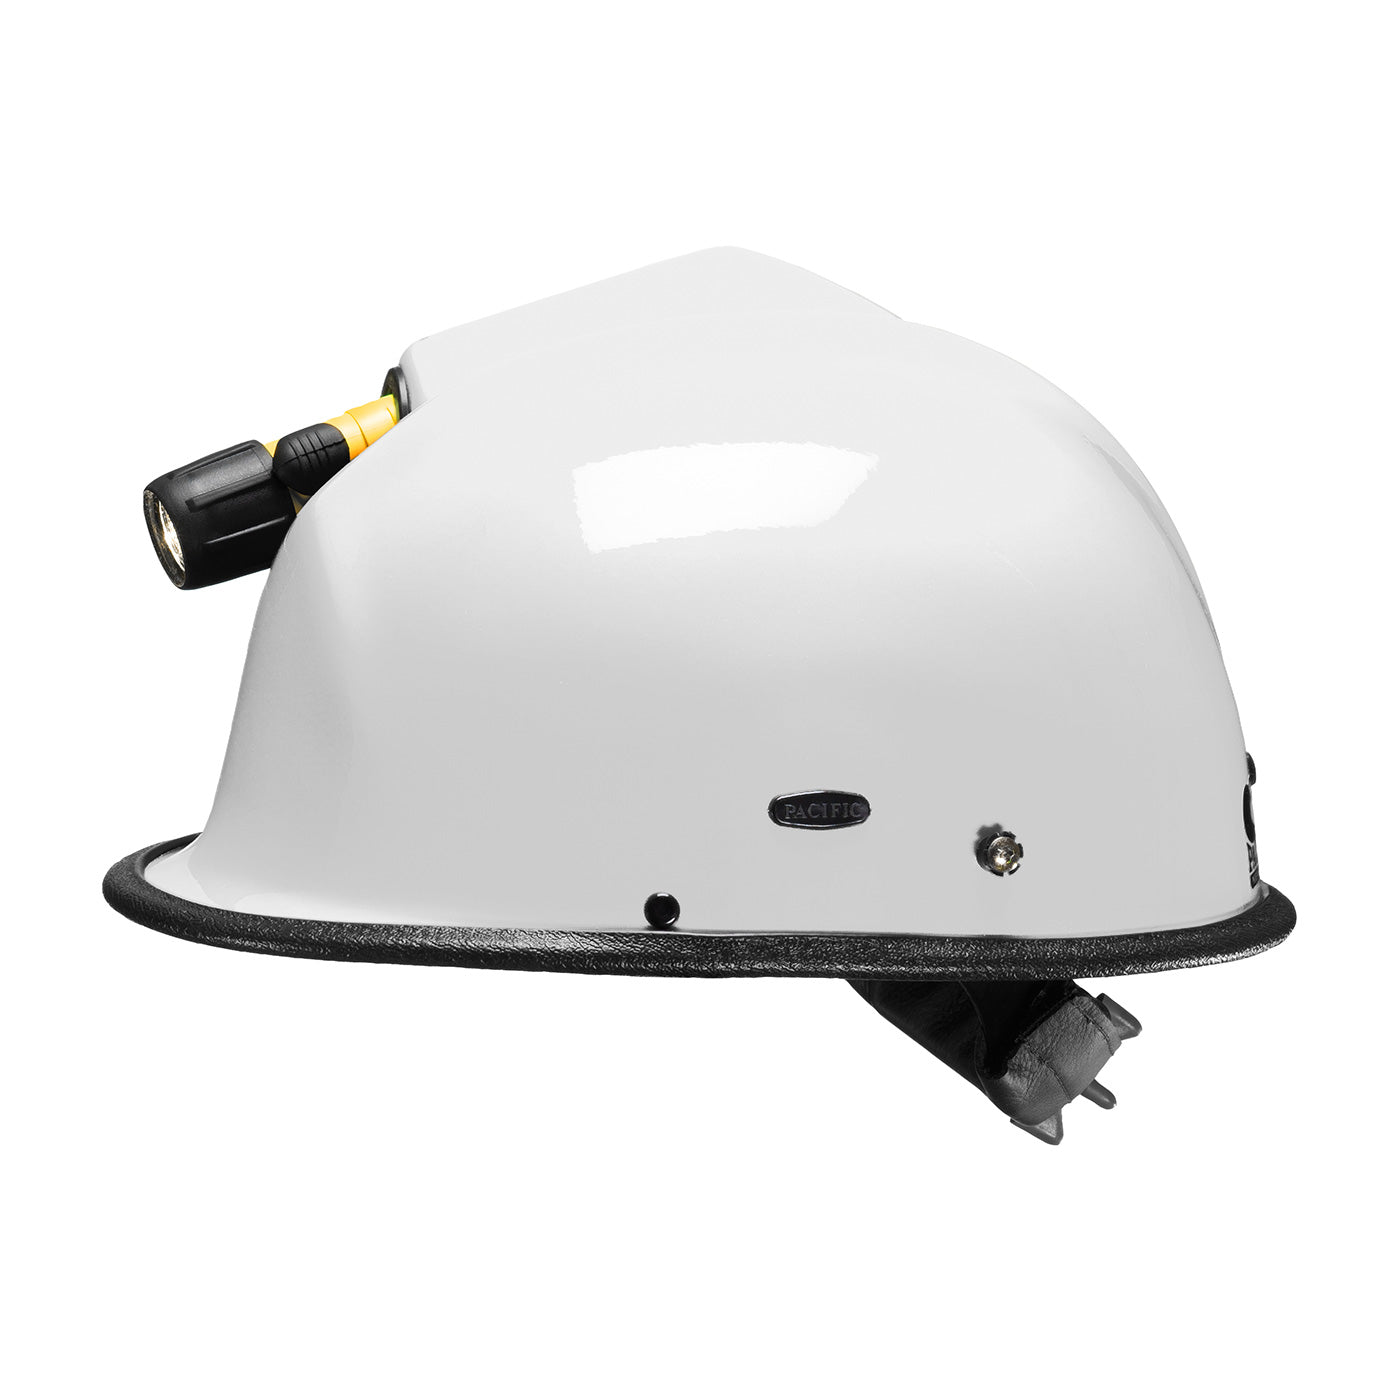 R3T Kiwi Rescue Helmet with ESS Goggle Mounts and Built-in Light Holder